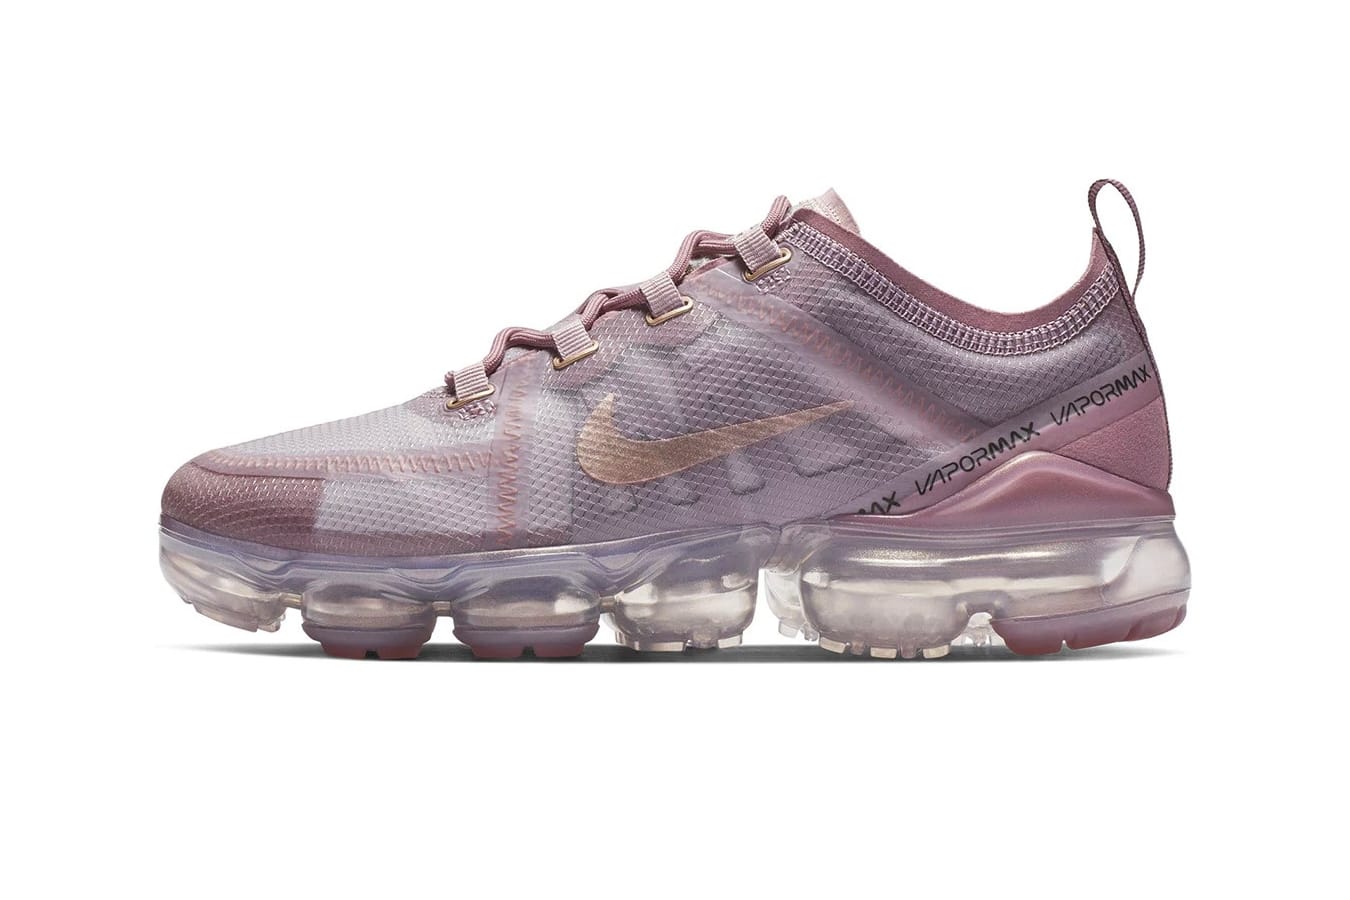 A New Nike Air VaporMax 2019 Colorway 